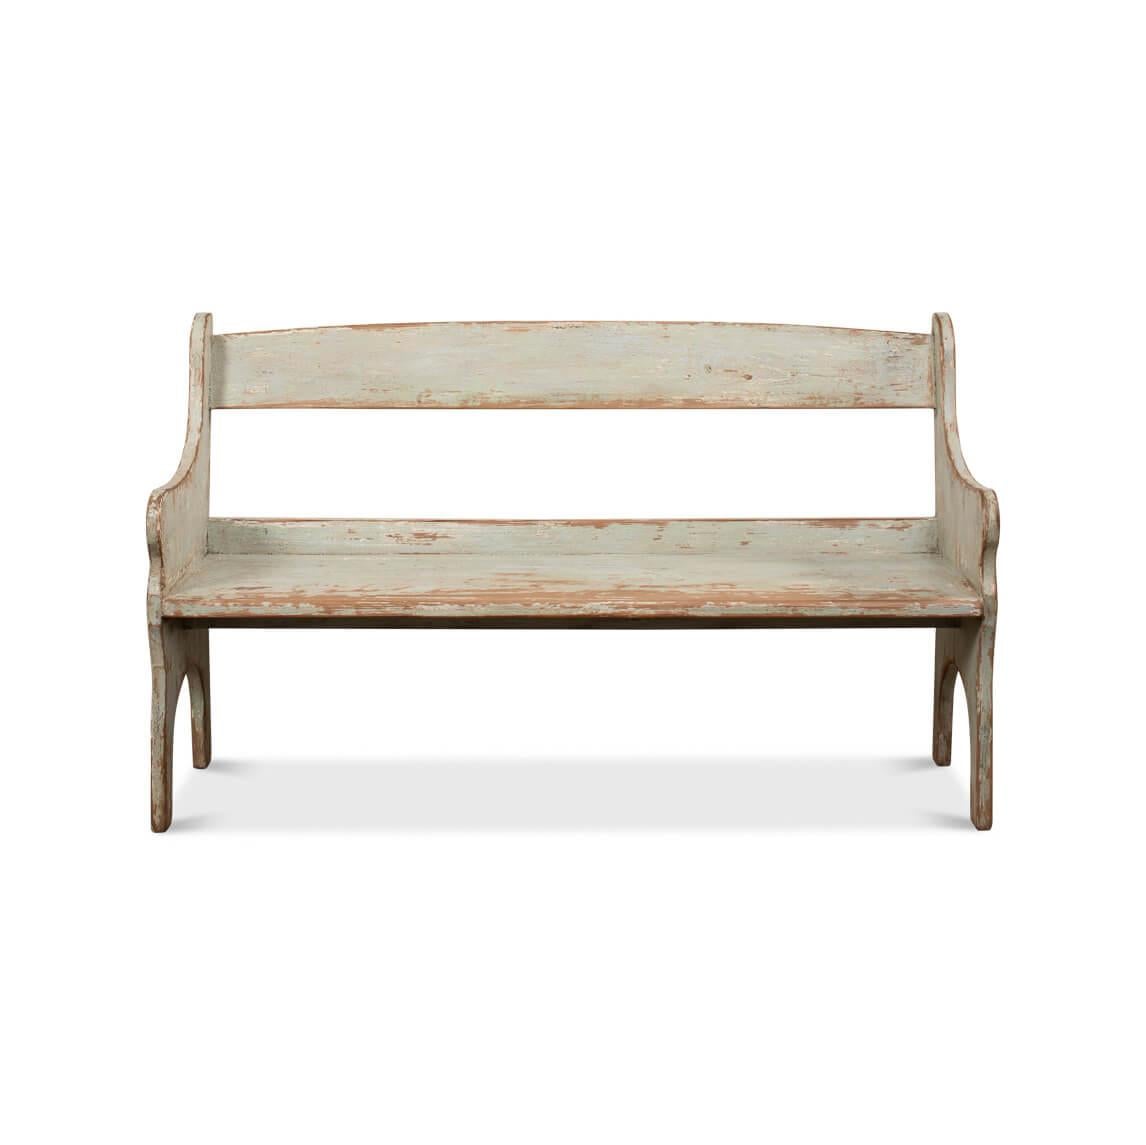 This piece, with its lovingly worn sage paint and solid, enduring wood construction, tells a story of gatherings and conversations from years past.

The soft patina, reminiscent of aged copper, adds a touch of nostalgic color that feels at home in